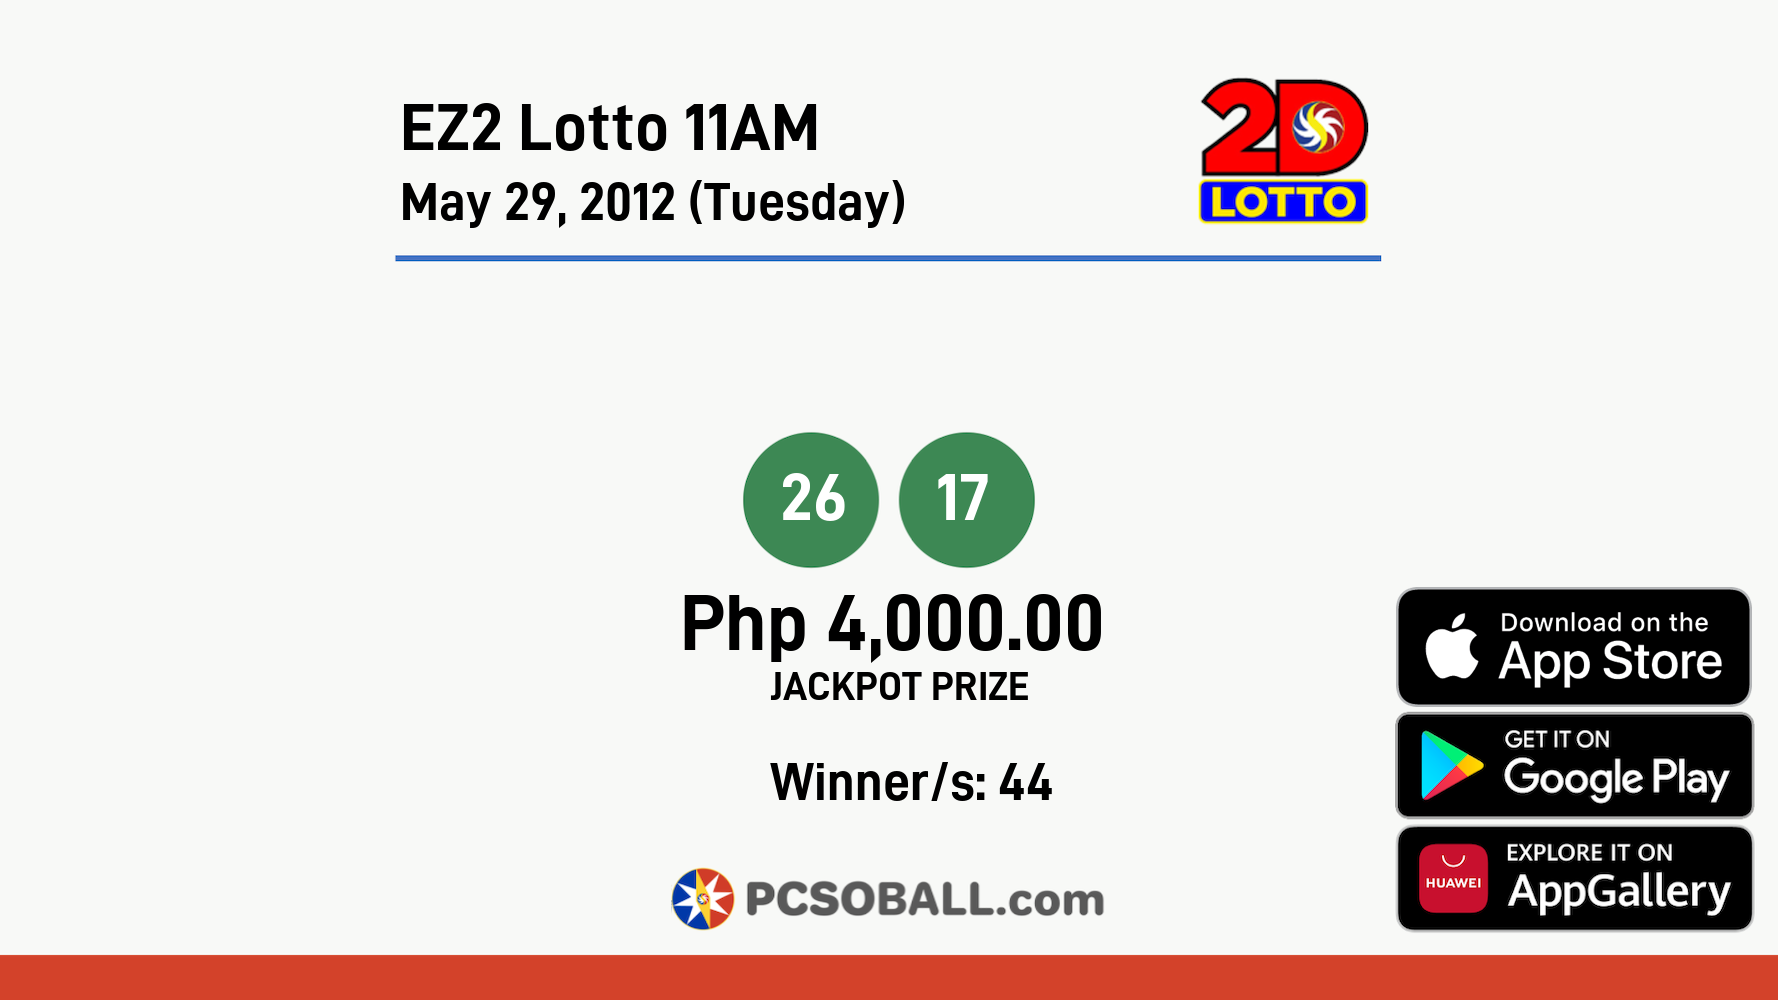 EZ2 Lotto 11AM May 29, 2012 (Tuesday) Result